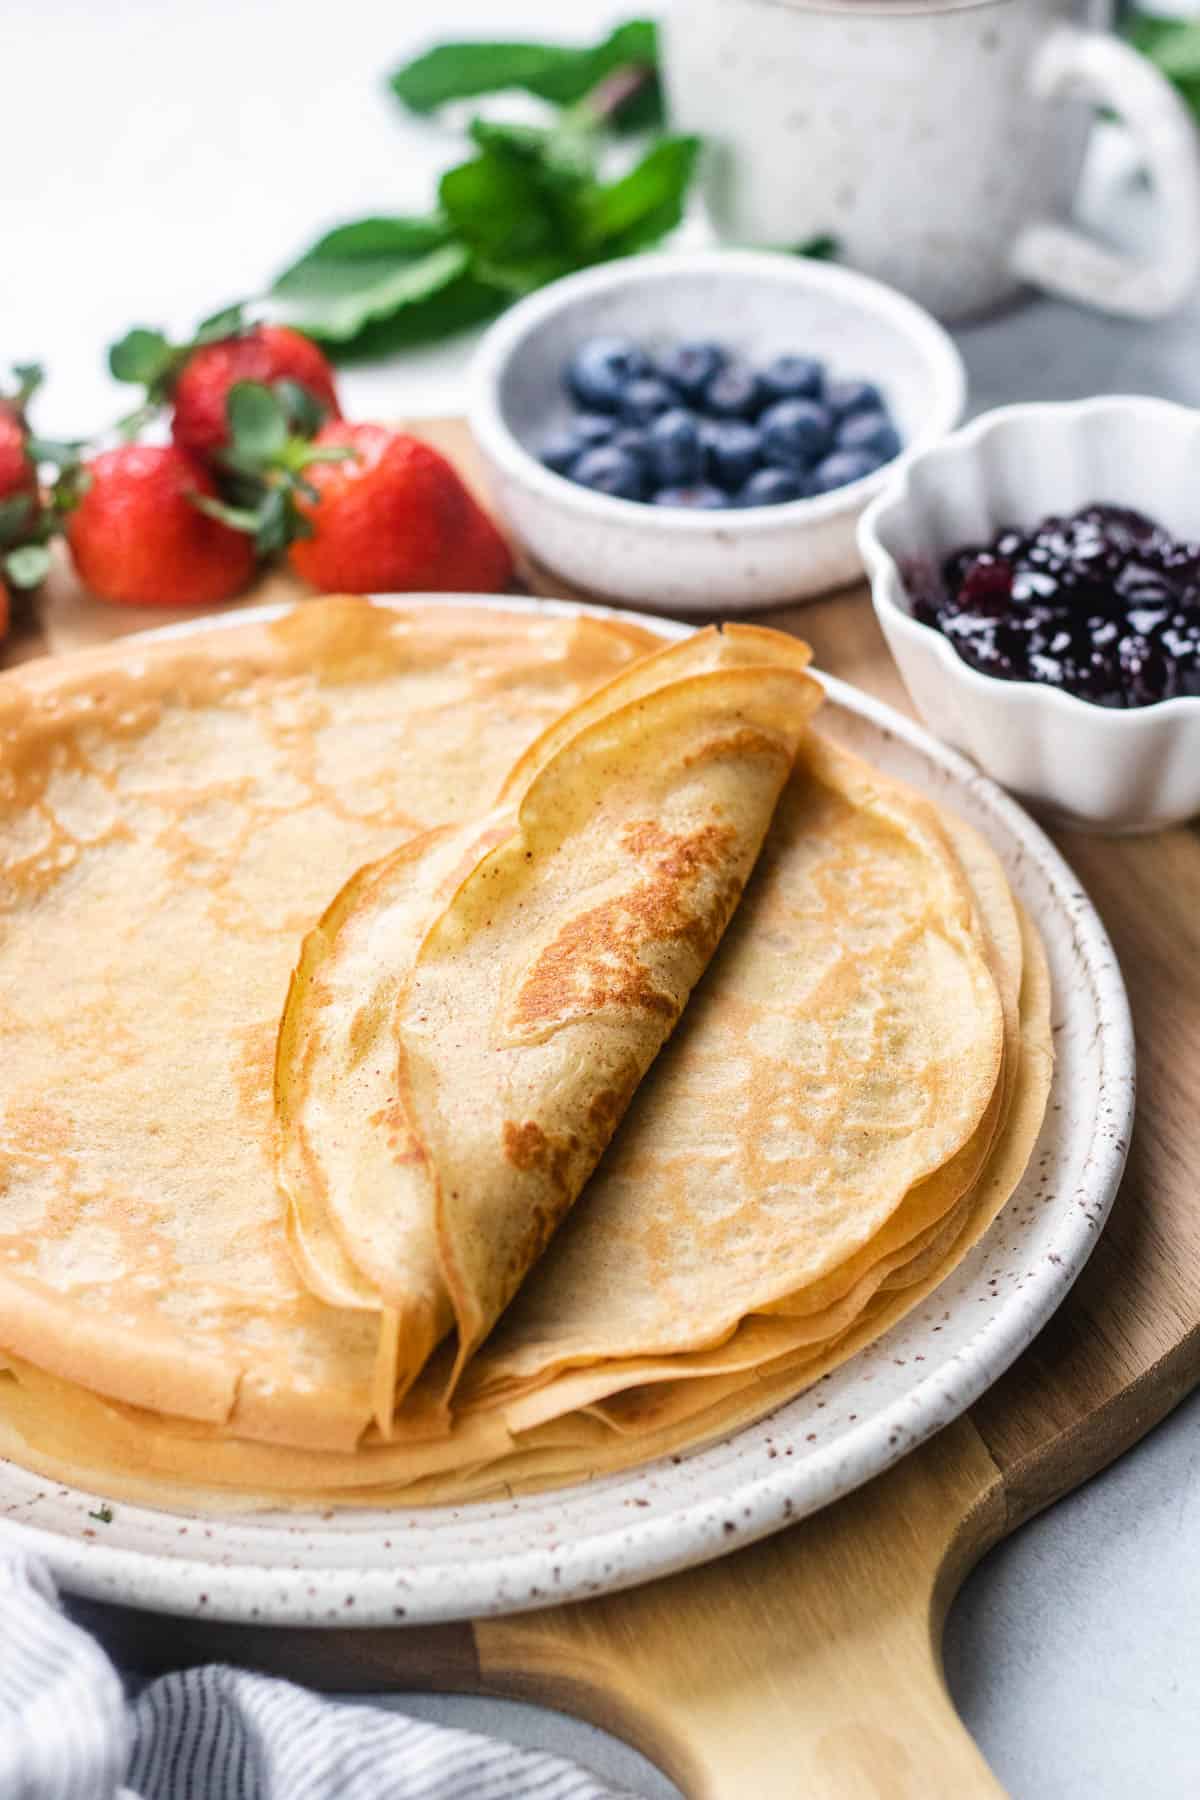 Crepes on a plate with berries and jam.